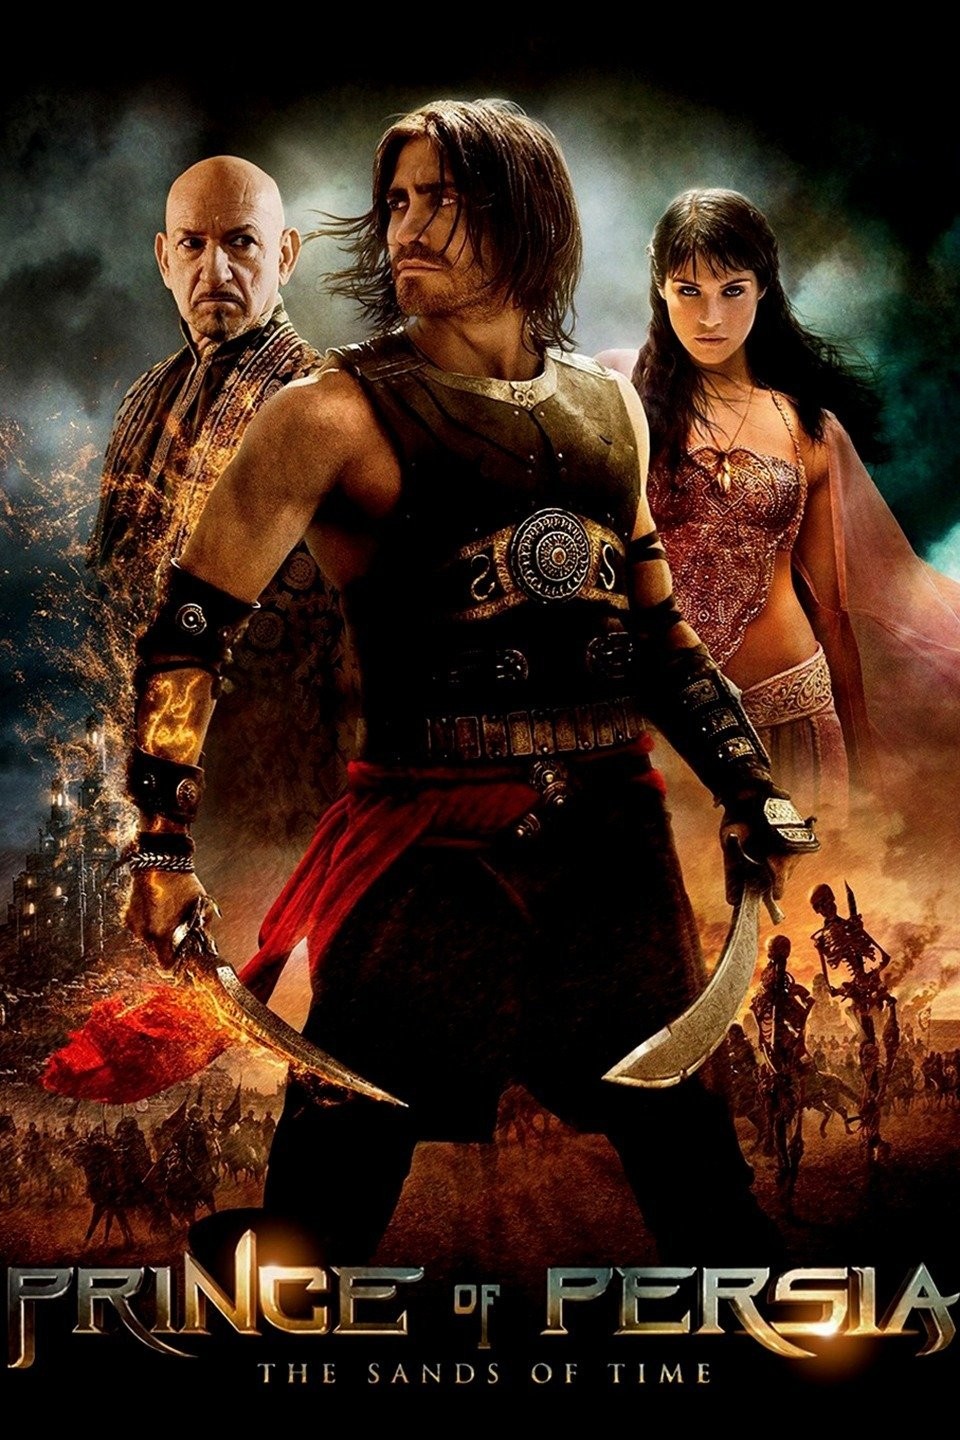 Movie Review: “Prince of Persia: The Sands of Time”